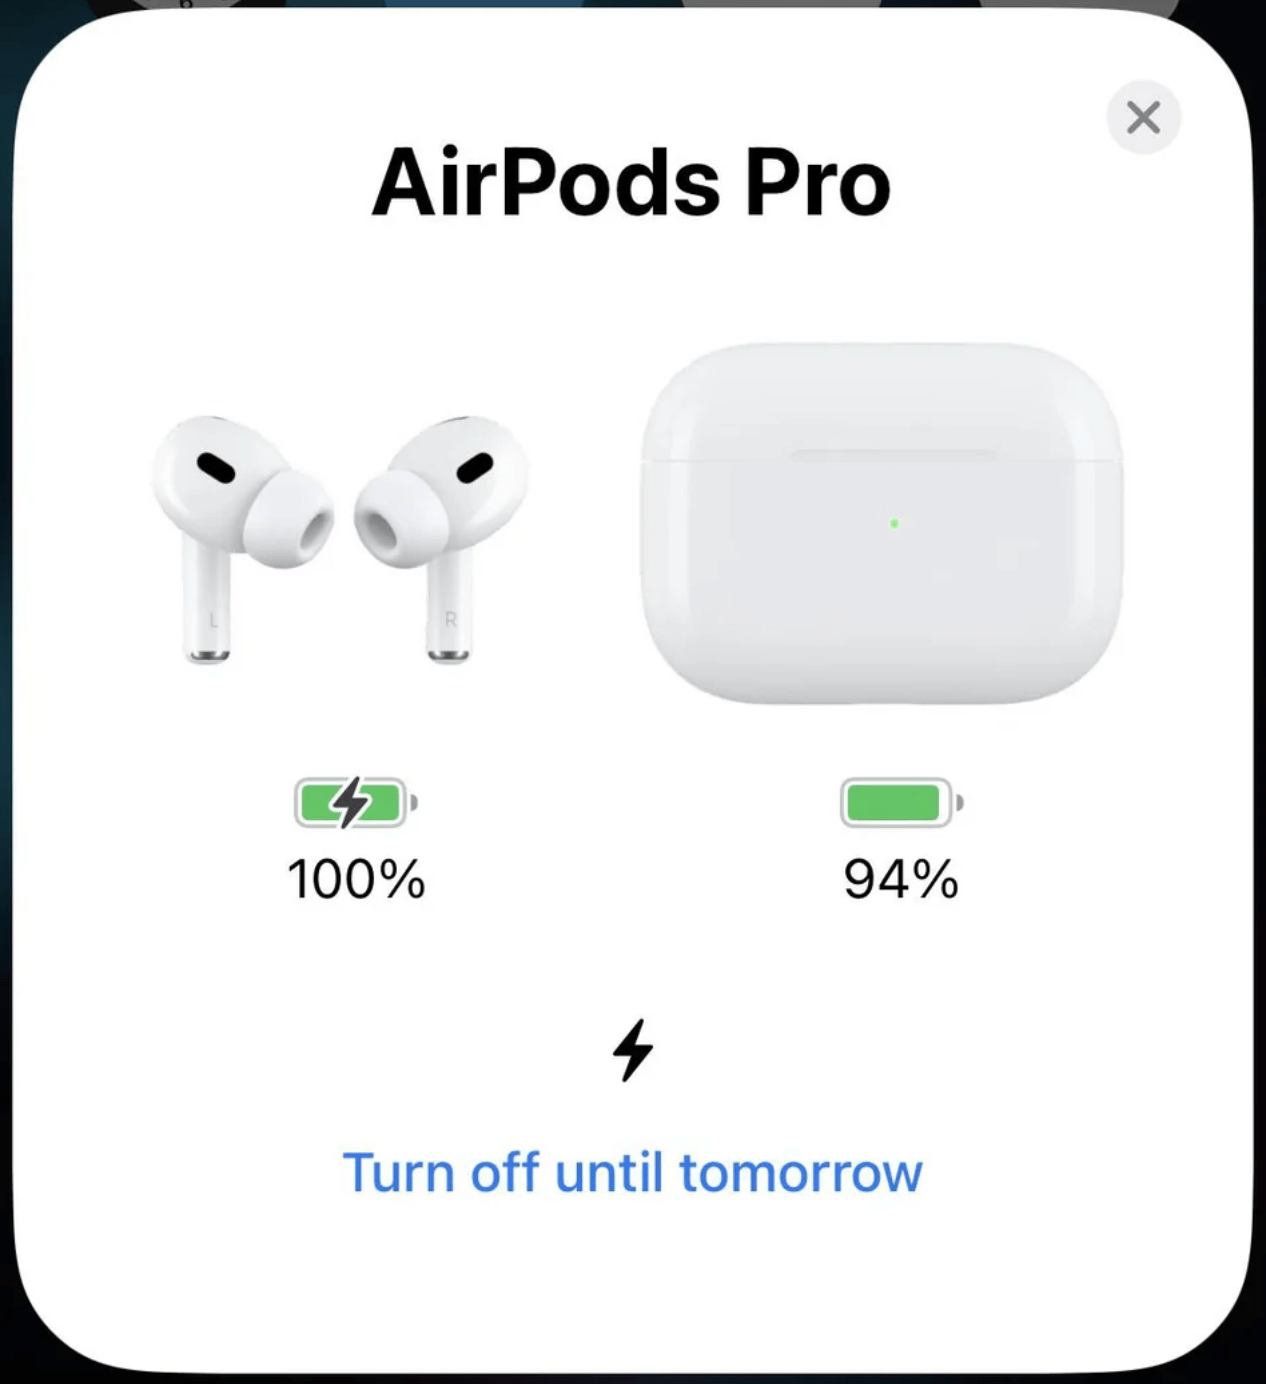 AirPods turn off until tomorrow message